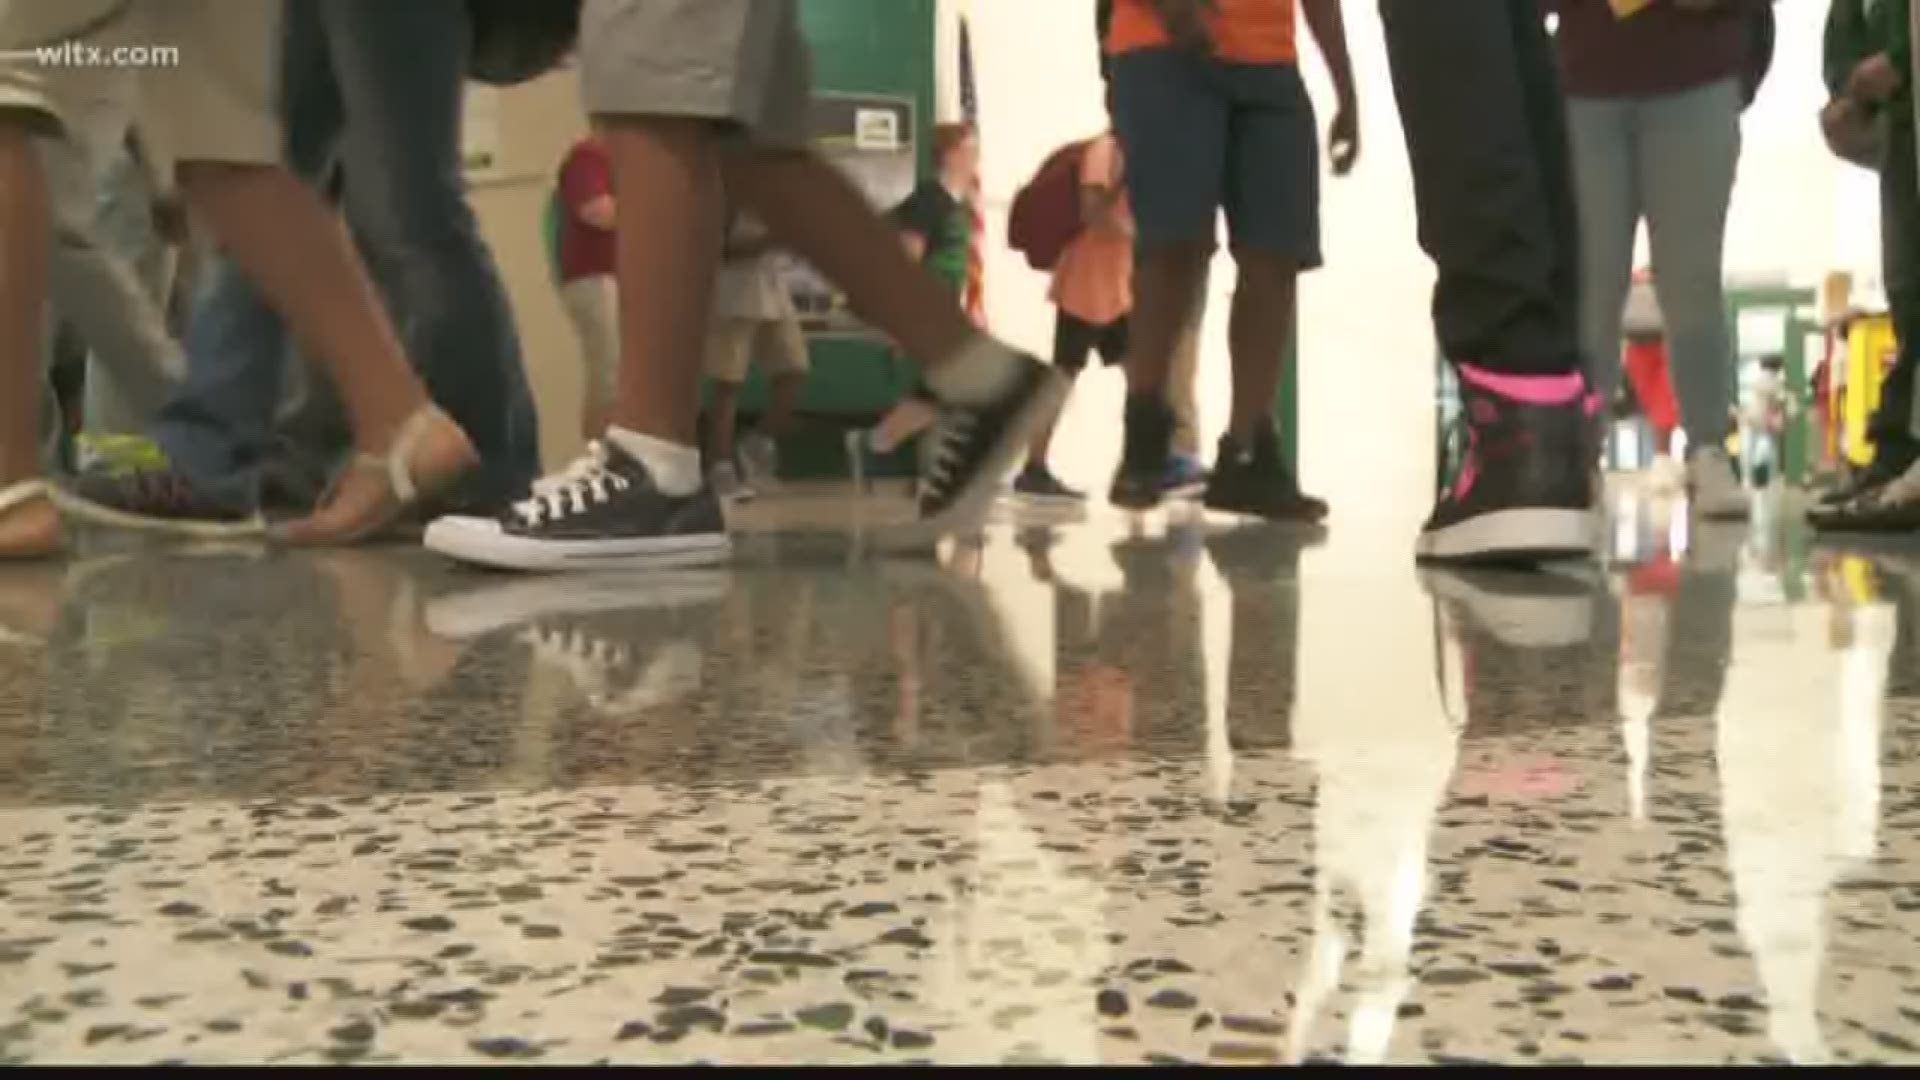 While the school district plans on saving money, some parents will have to pay a little more for child care.